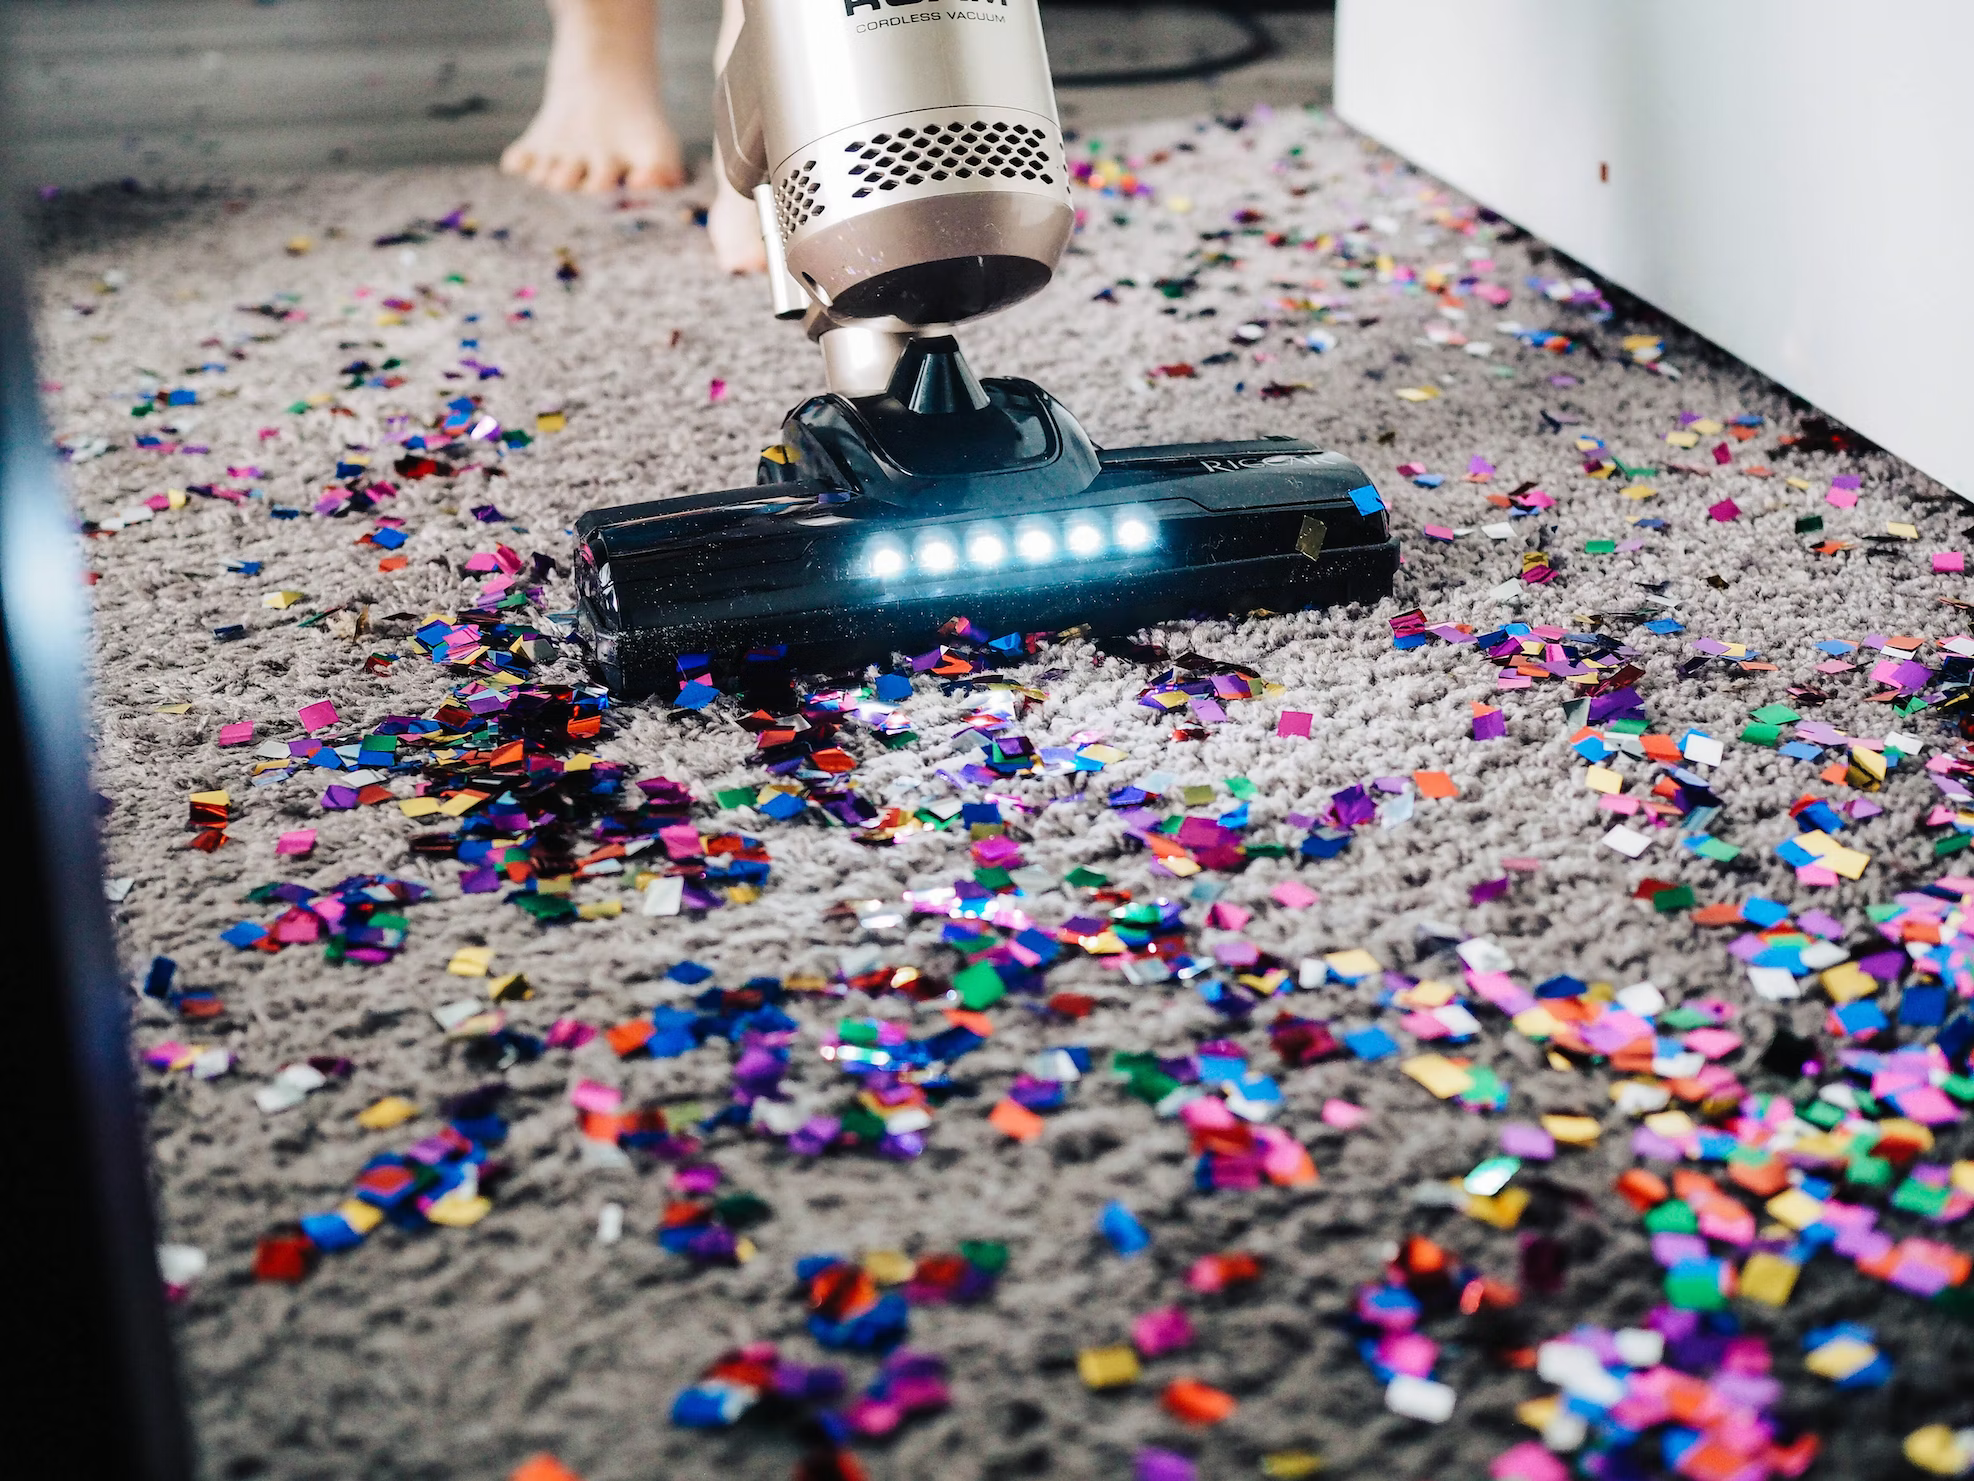 A vacuum on a carpet covered in confetti